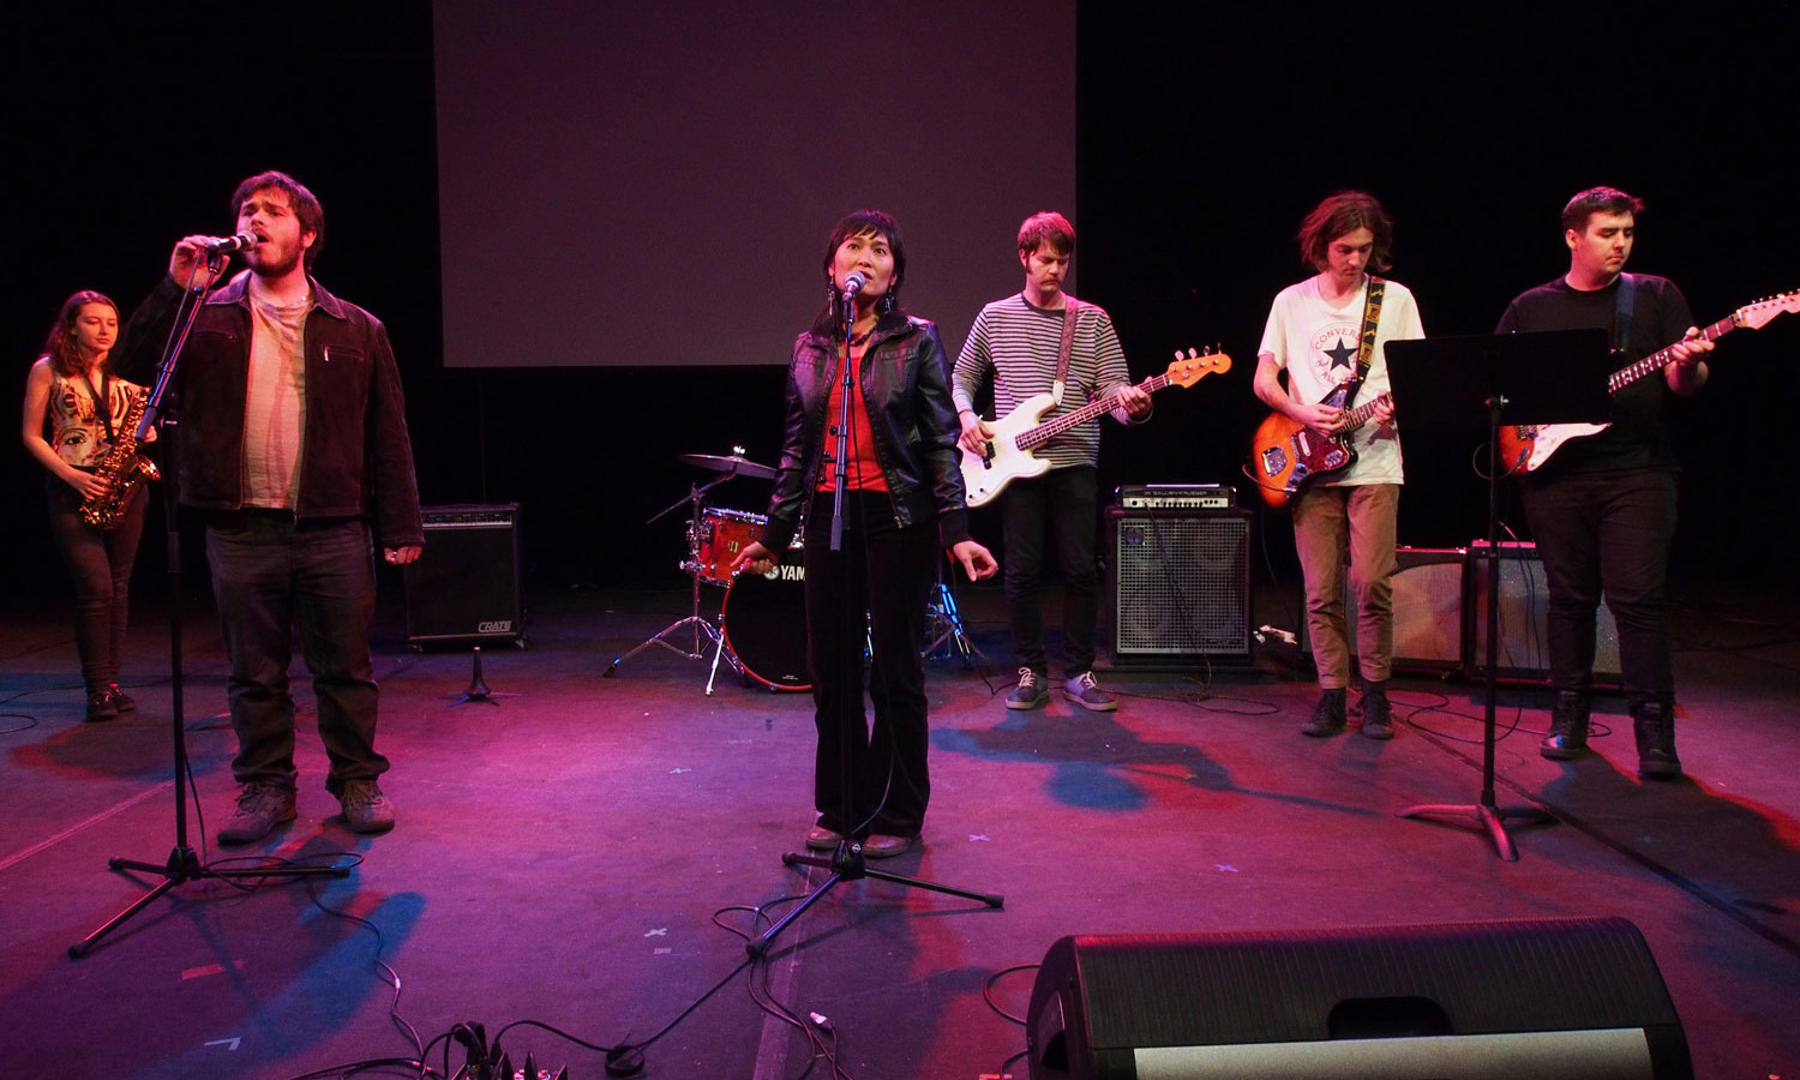 Music students singing on stage, with musicians playing saxophone and electric guitars